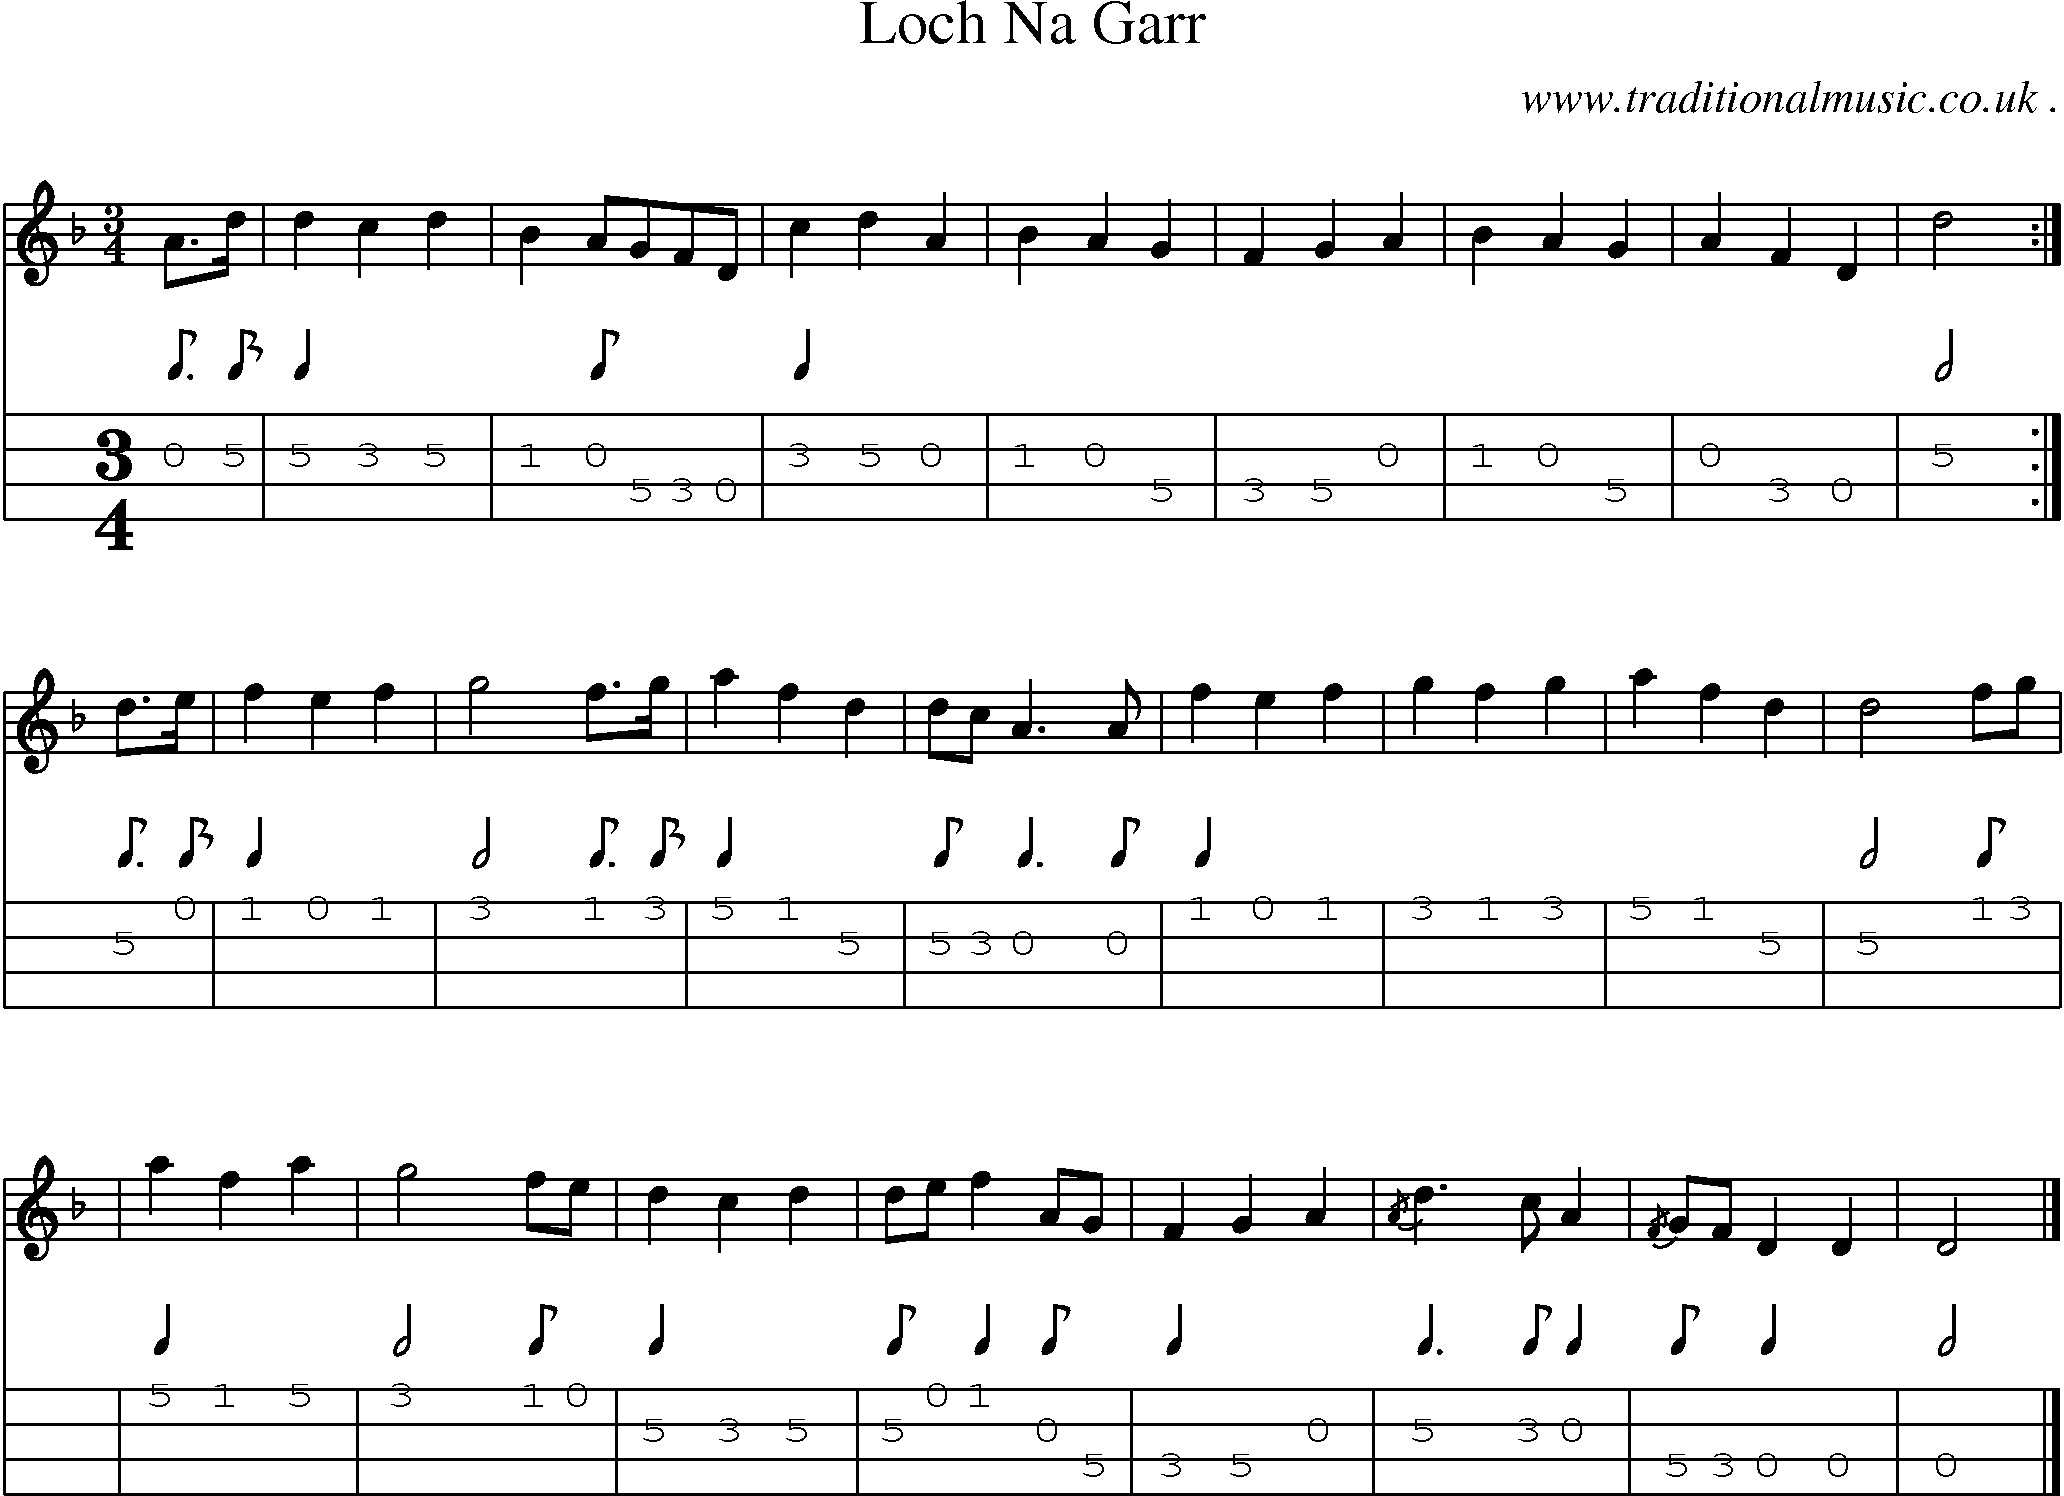 Sheet-music  score, Chords and Mandolin Tabs for Loch Na Garr